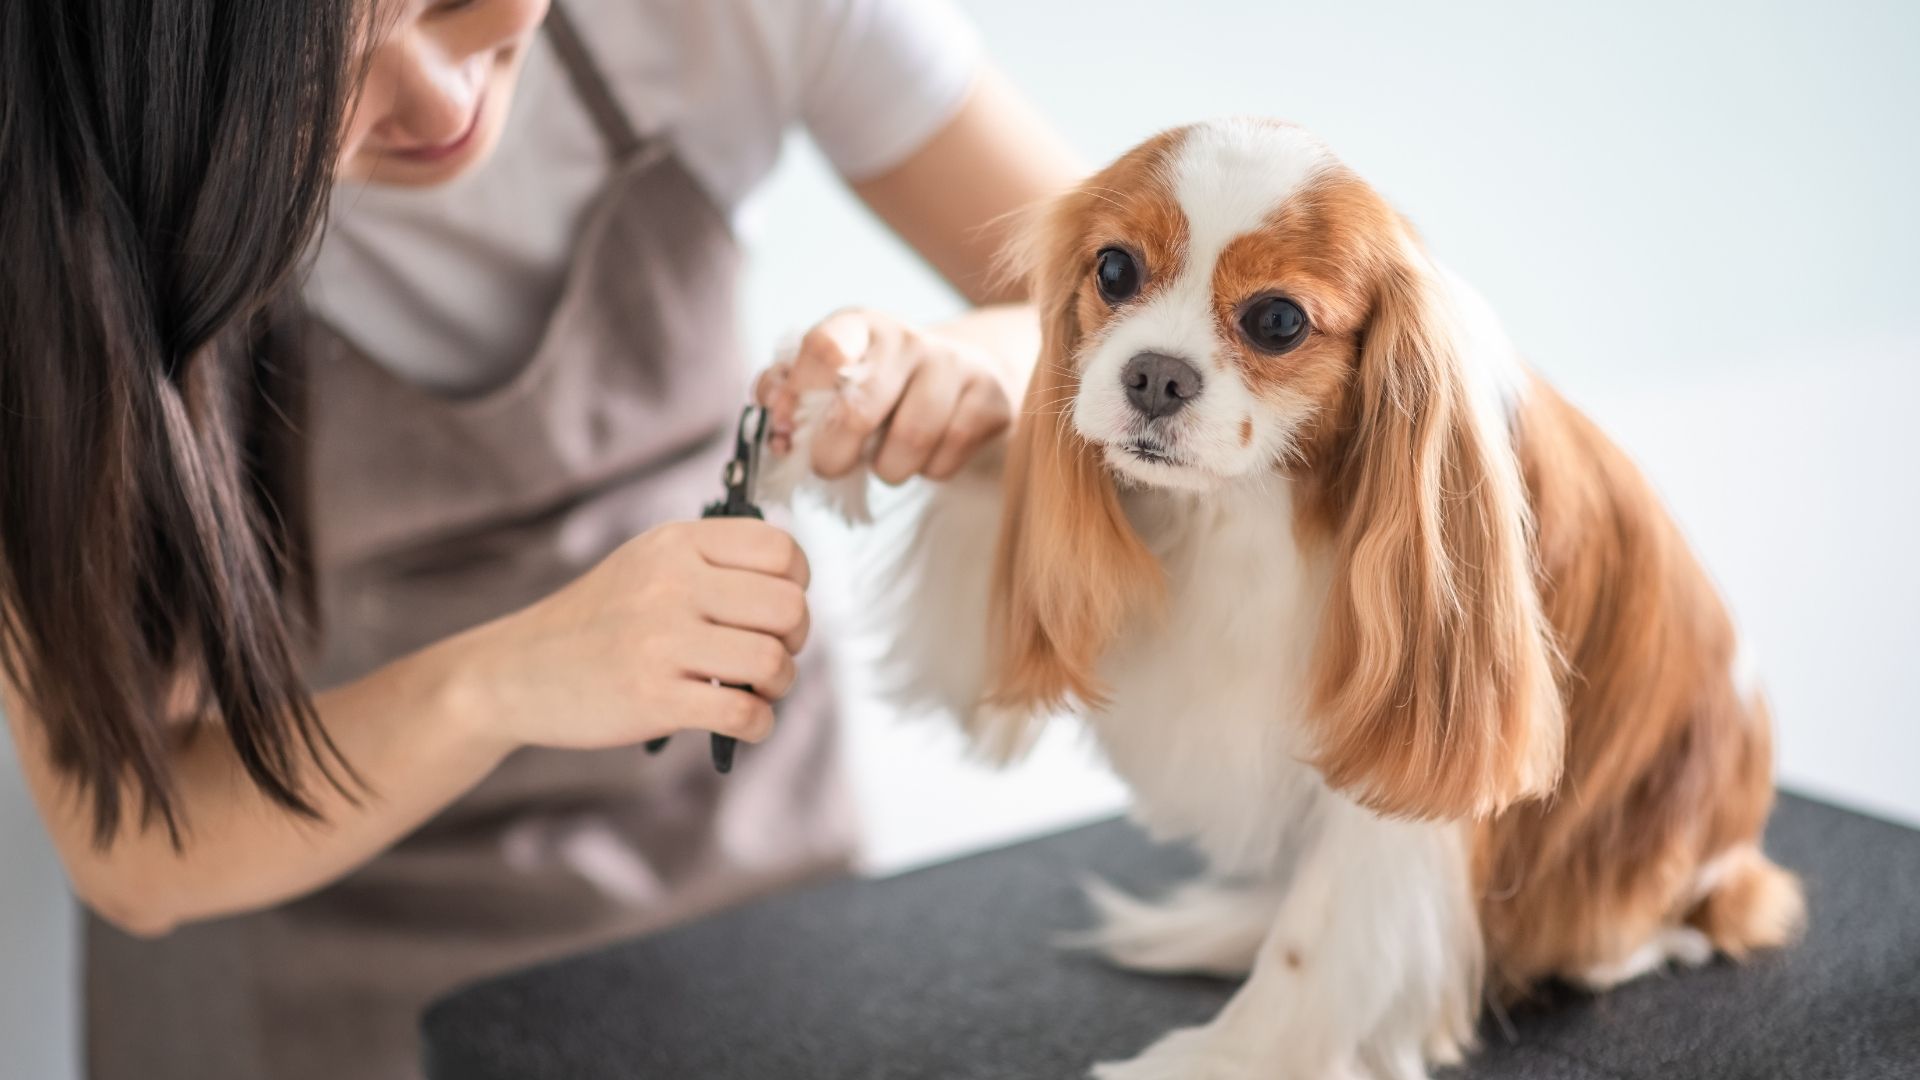 Designing a pet grooming room allows you to tailor the space to your pet's needs.